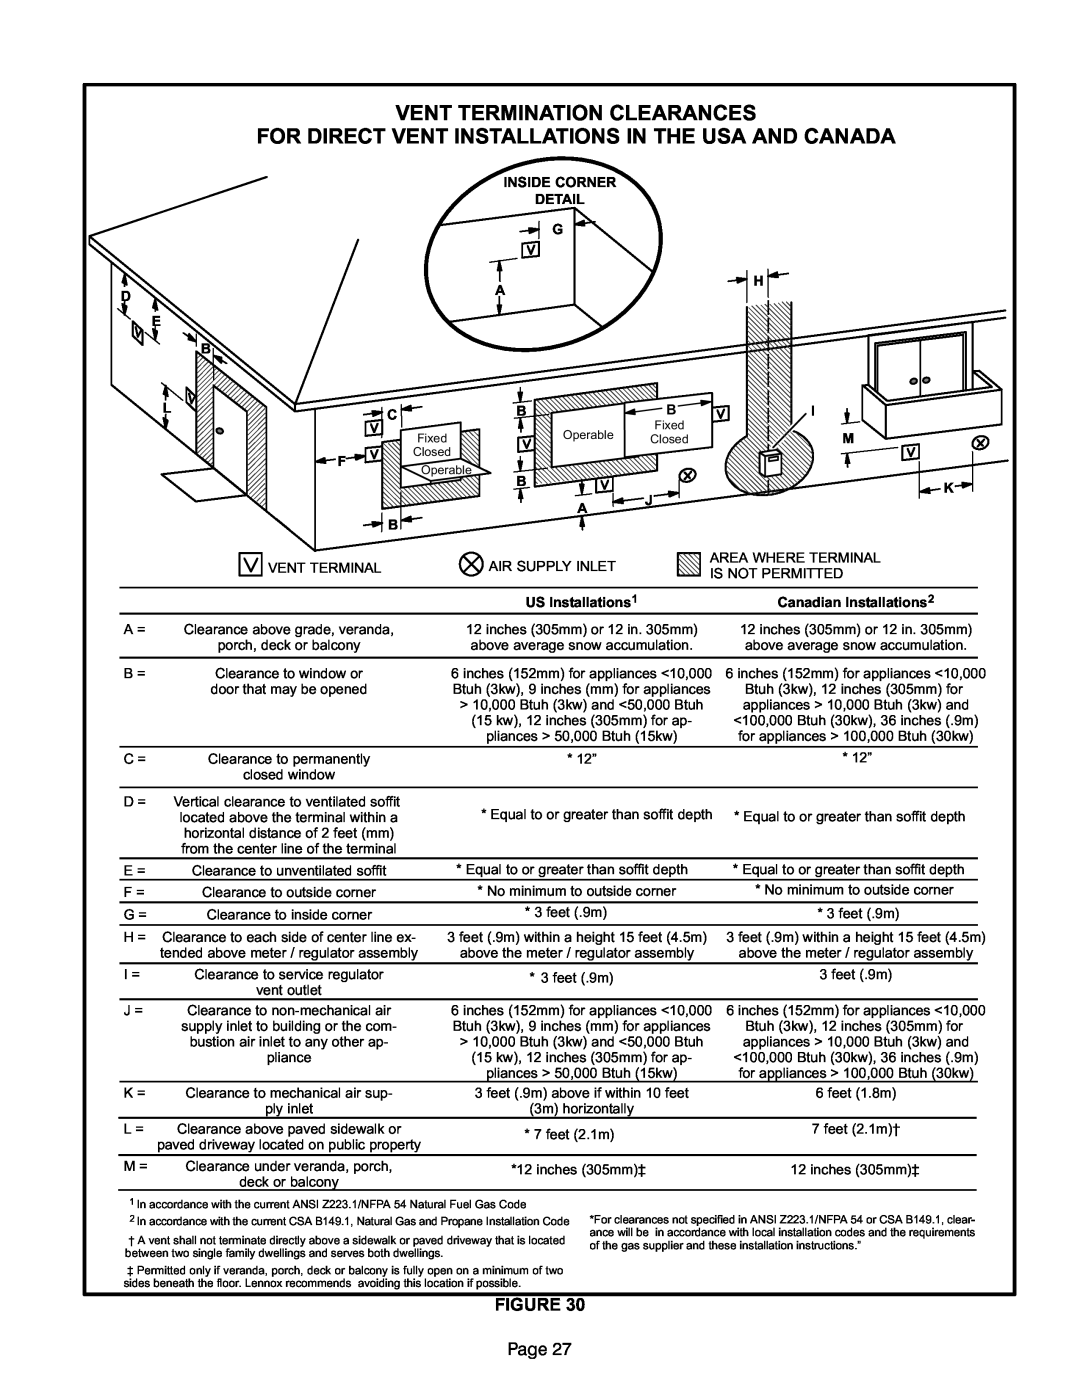 Lennox International Inc G61MP Series Units, Gas Units installation instructions Vent Termination Clearances, FIGURE Page 